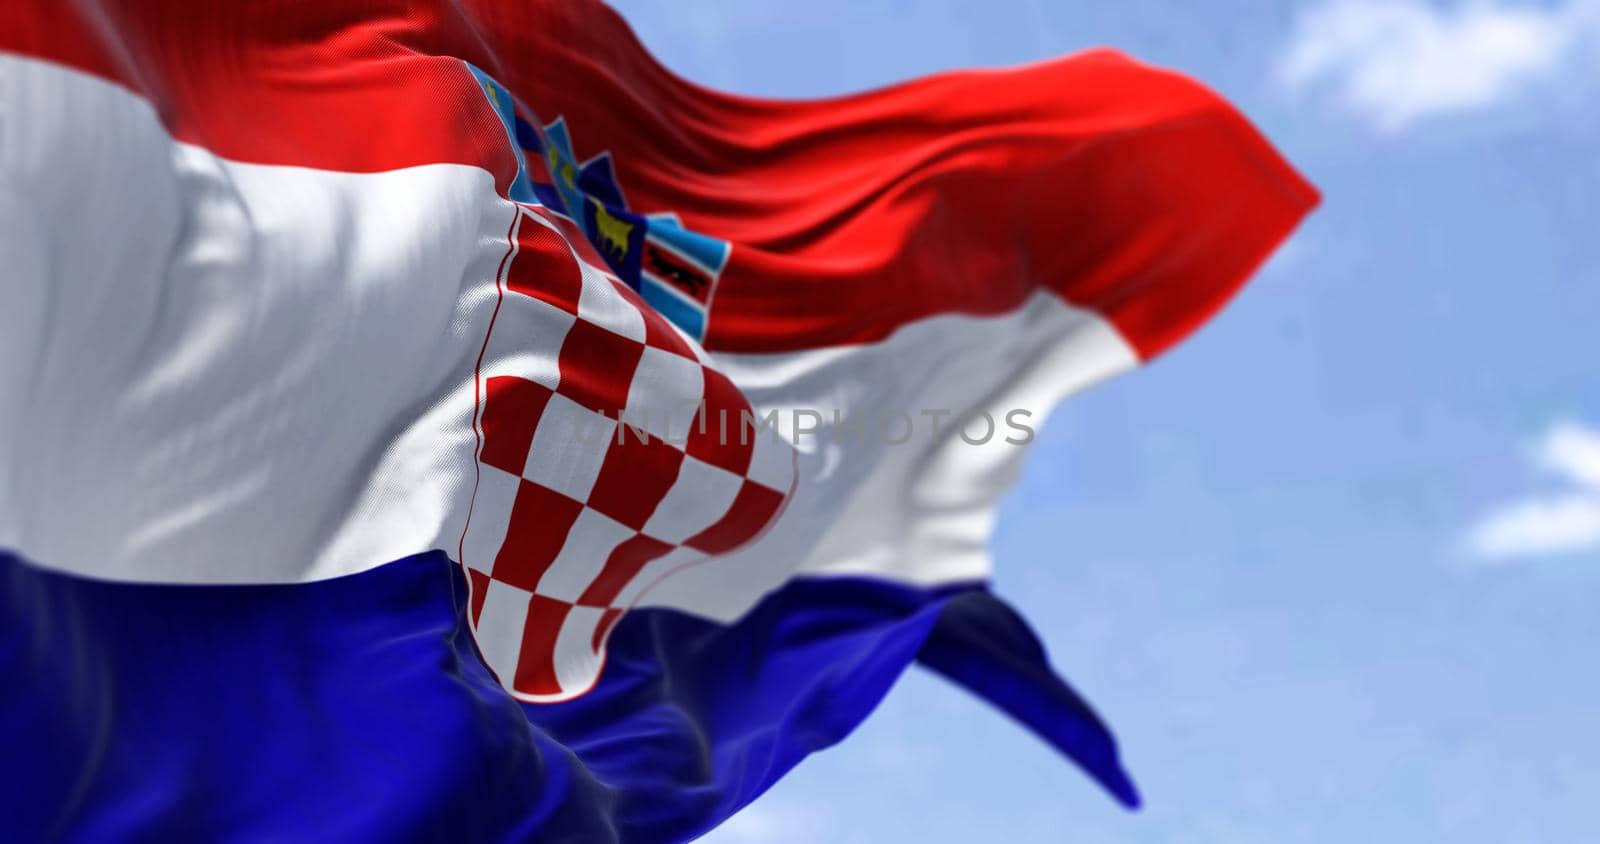 Detail of the national flag of Croatia waving in the wind on a clear day. Democracy and politics. Patriotism. European country. Selective focus.